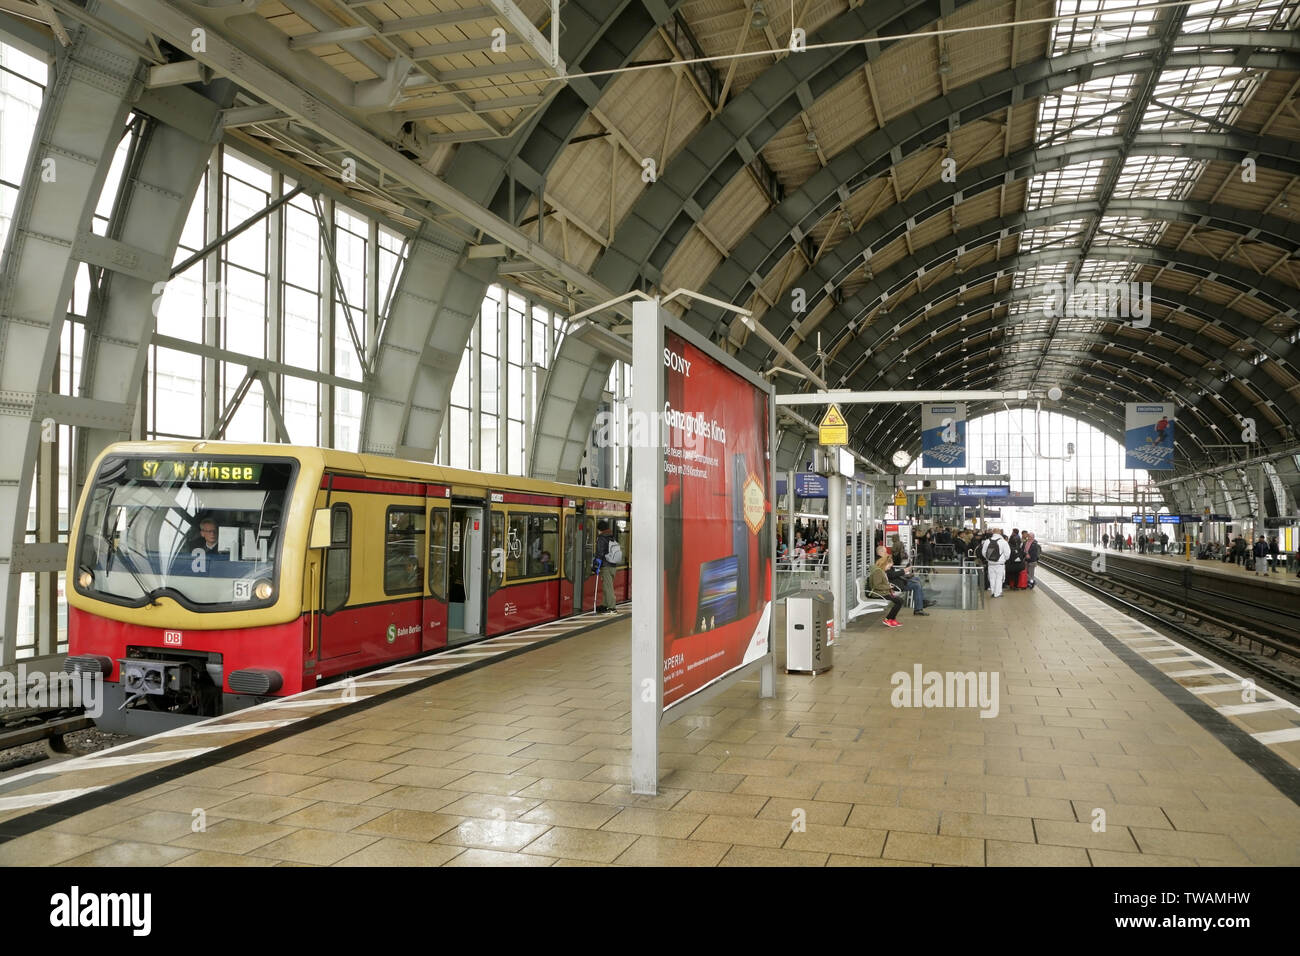 S-bahn train bound for Wannsee at the Alexanderplatz station, East Berlin, Germany. Stock Photo